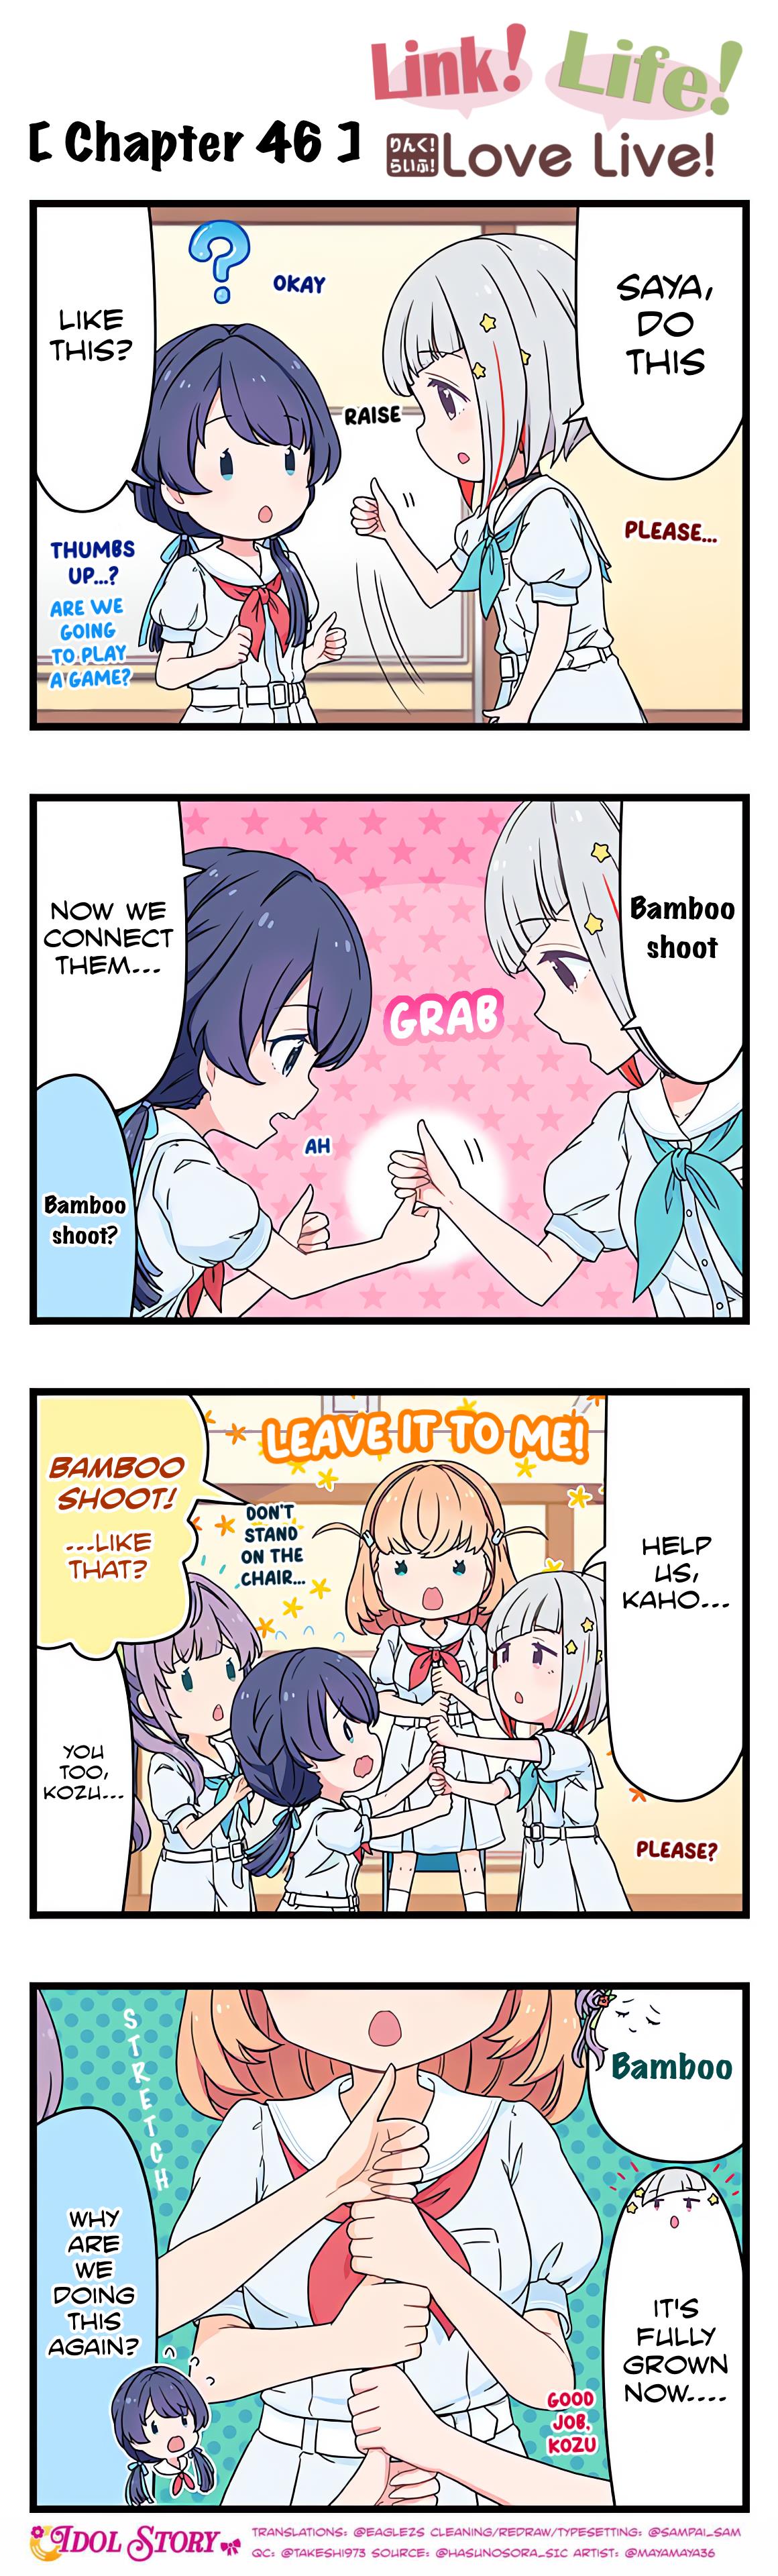 Link! Life! Love Live! Chapter 46 - Picture 1